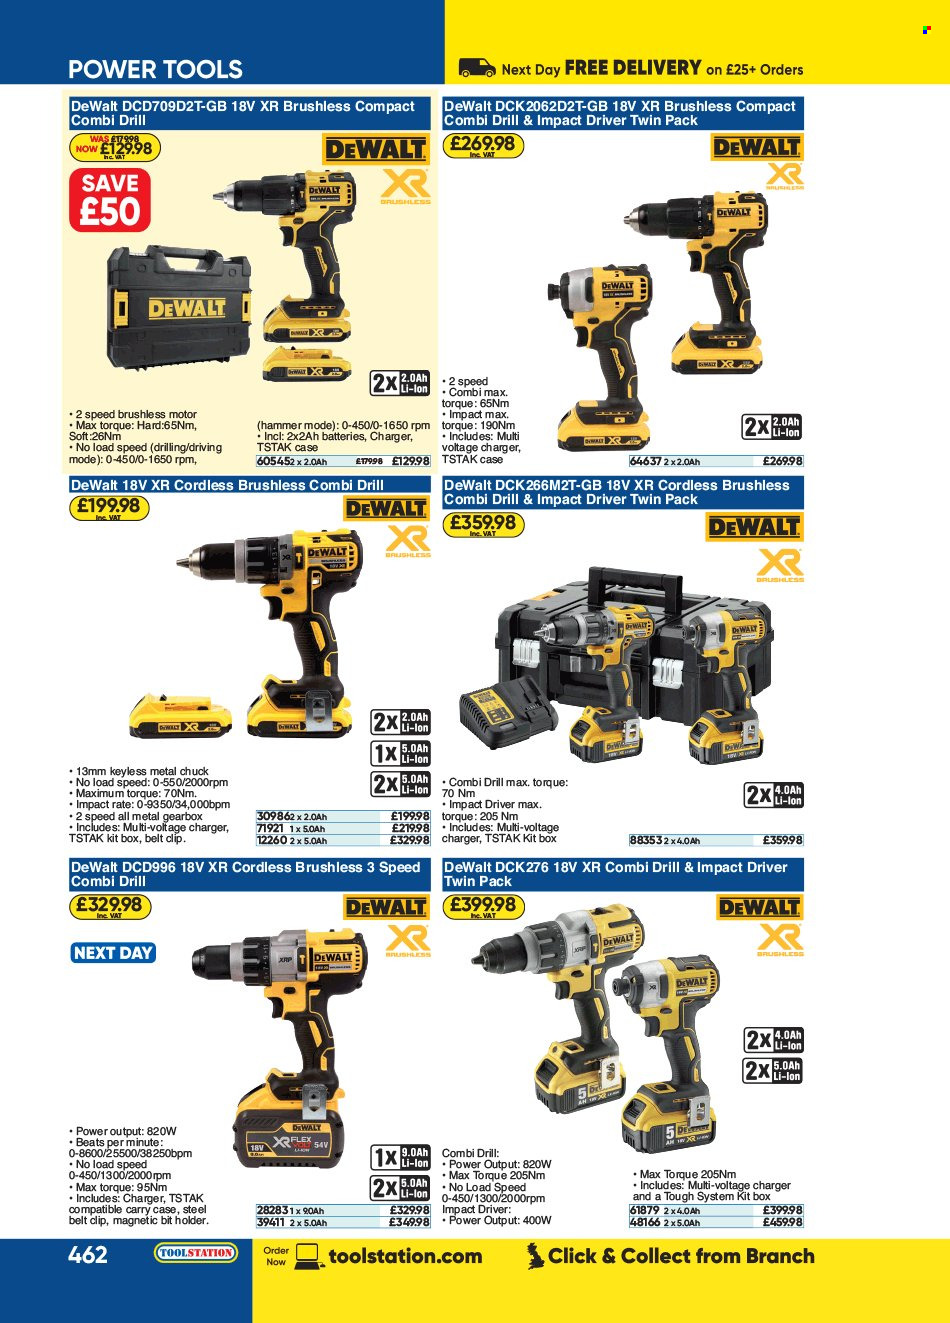 Toolstation offer . Page 462.